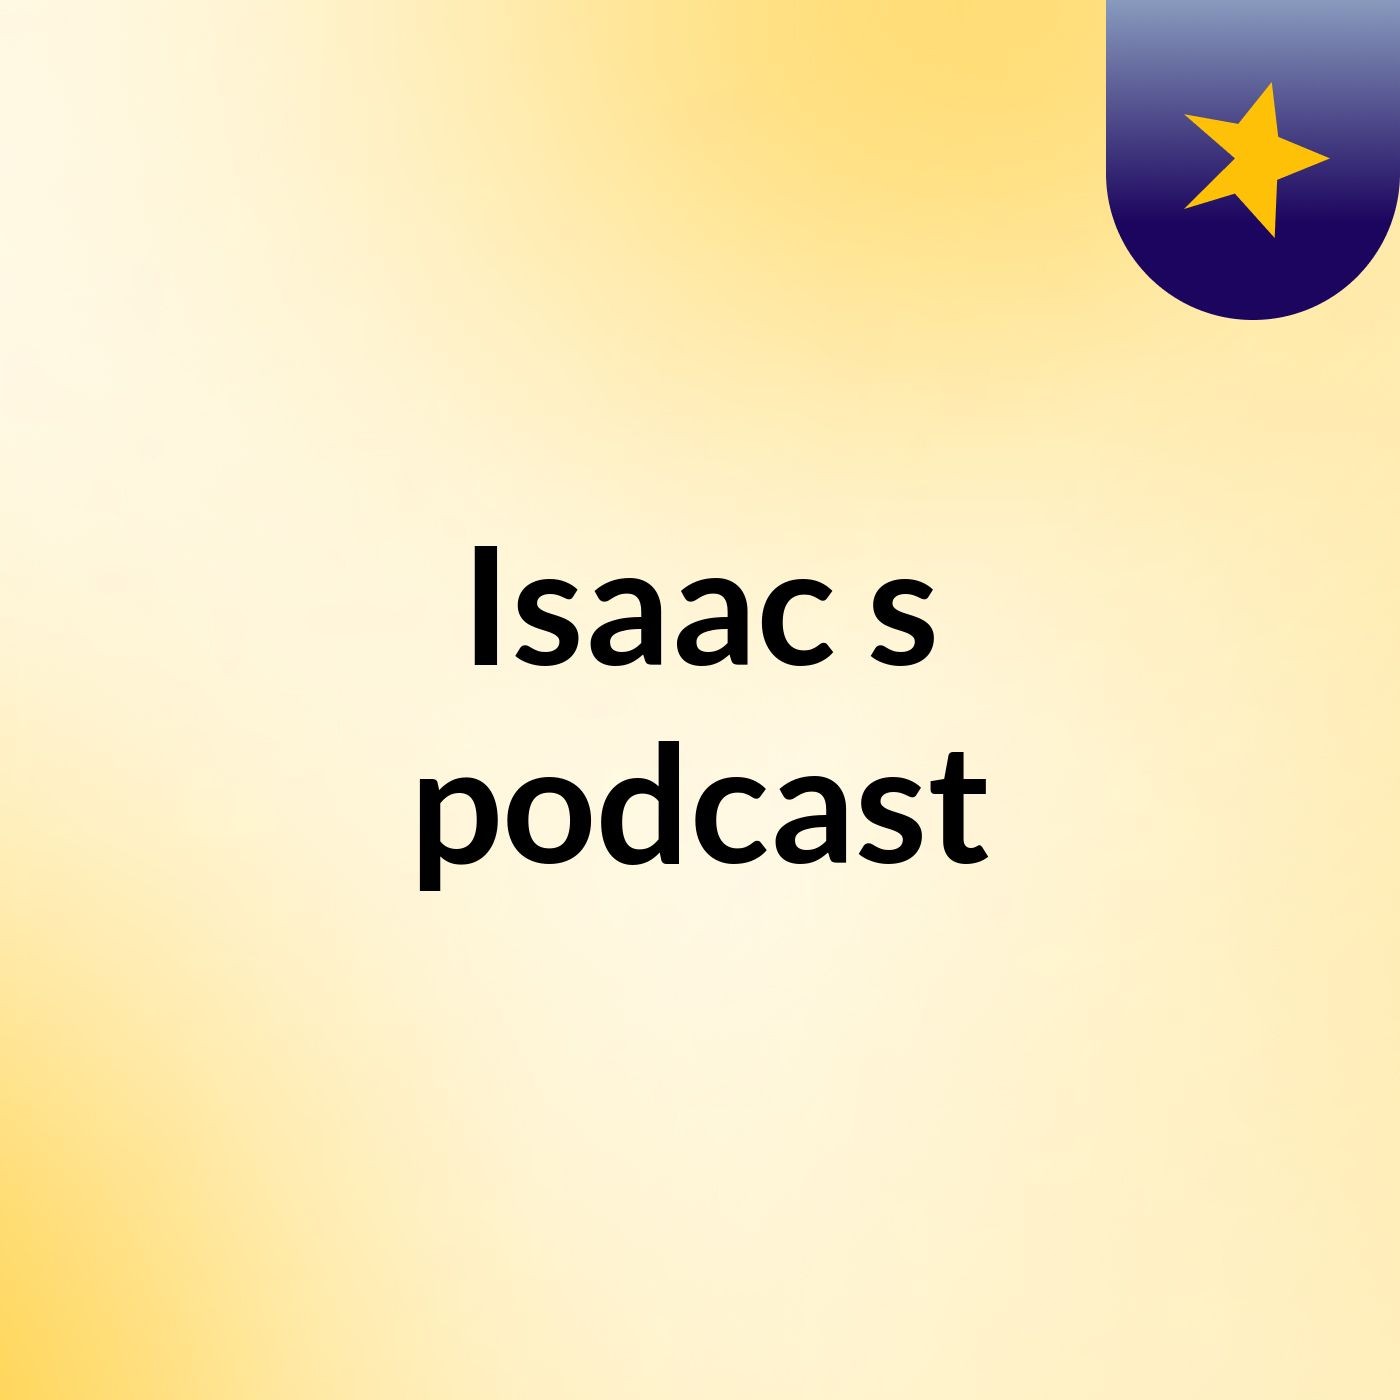 Episode 4 - Isaac's podcast